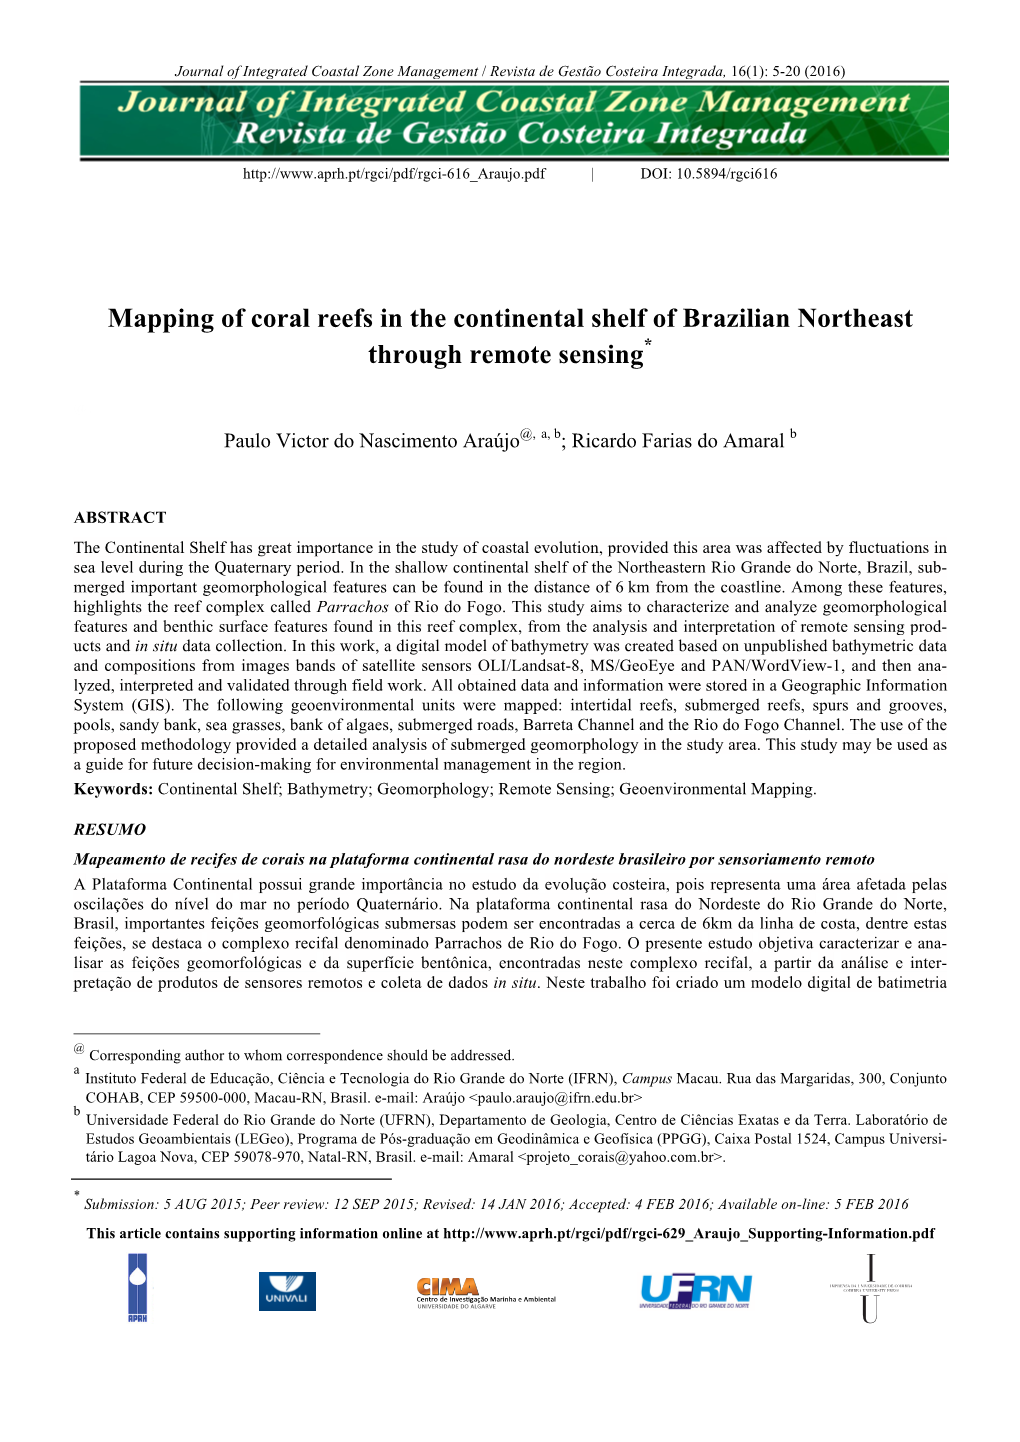 Mapping of Coral Reefs in the Continental Shelf of Brazilian Northeast Through Remote Sensing*